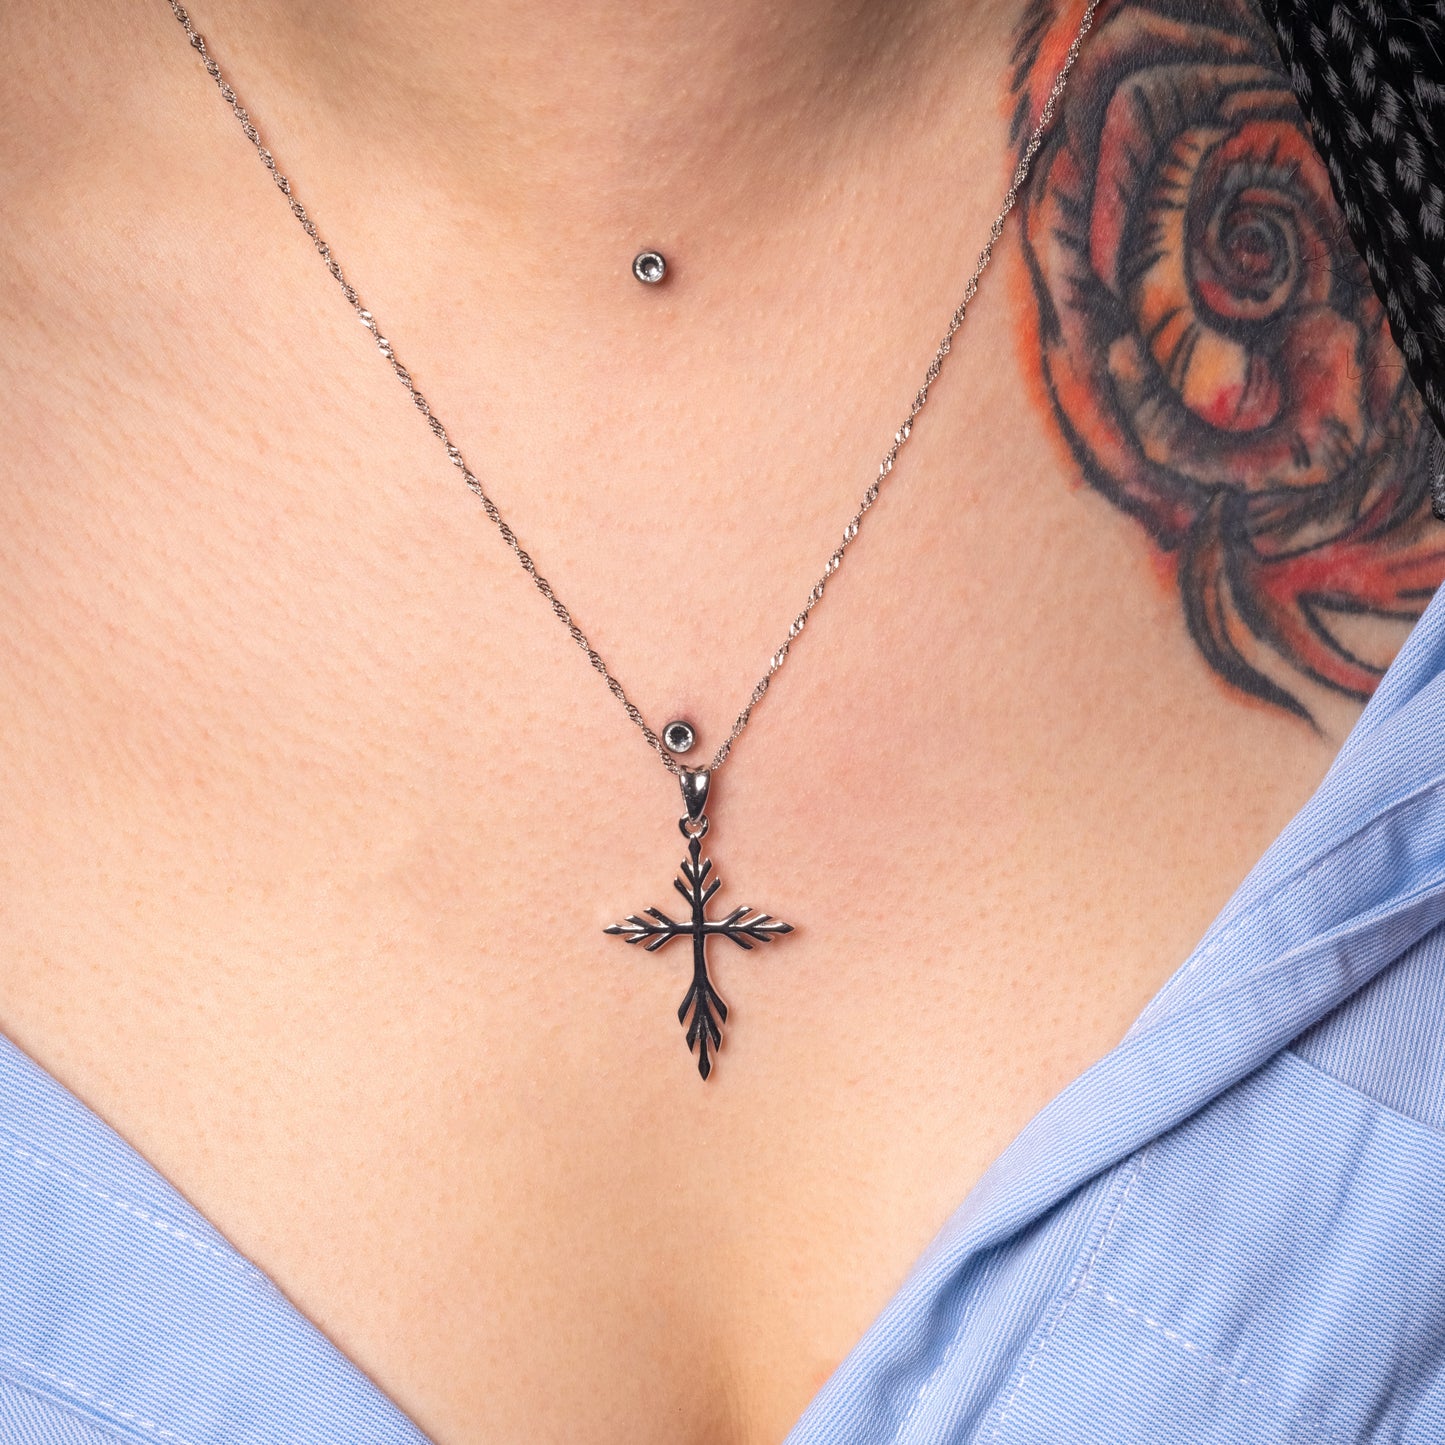 Model wearing Angel Cross Silver Pendant with Water Wave necklace. Zoomed-in view.